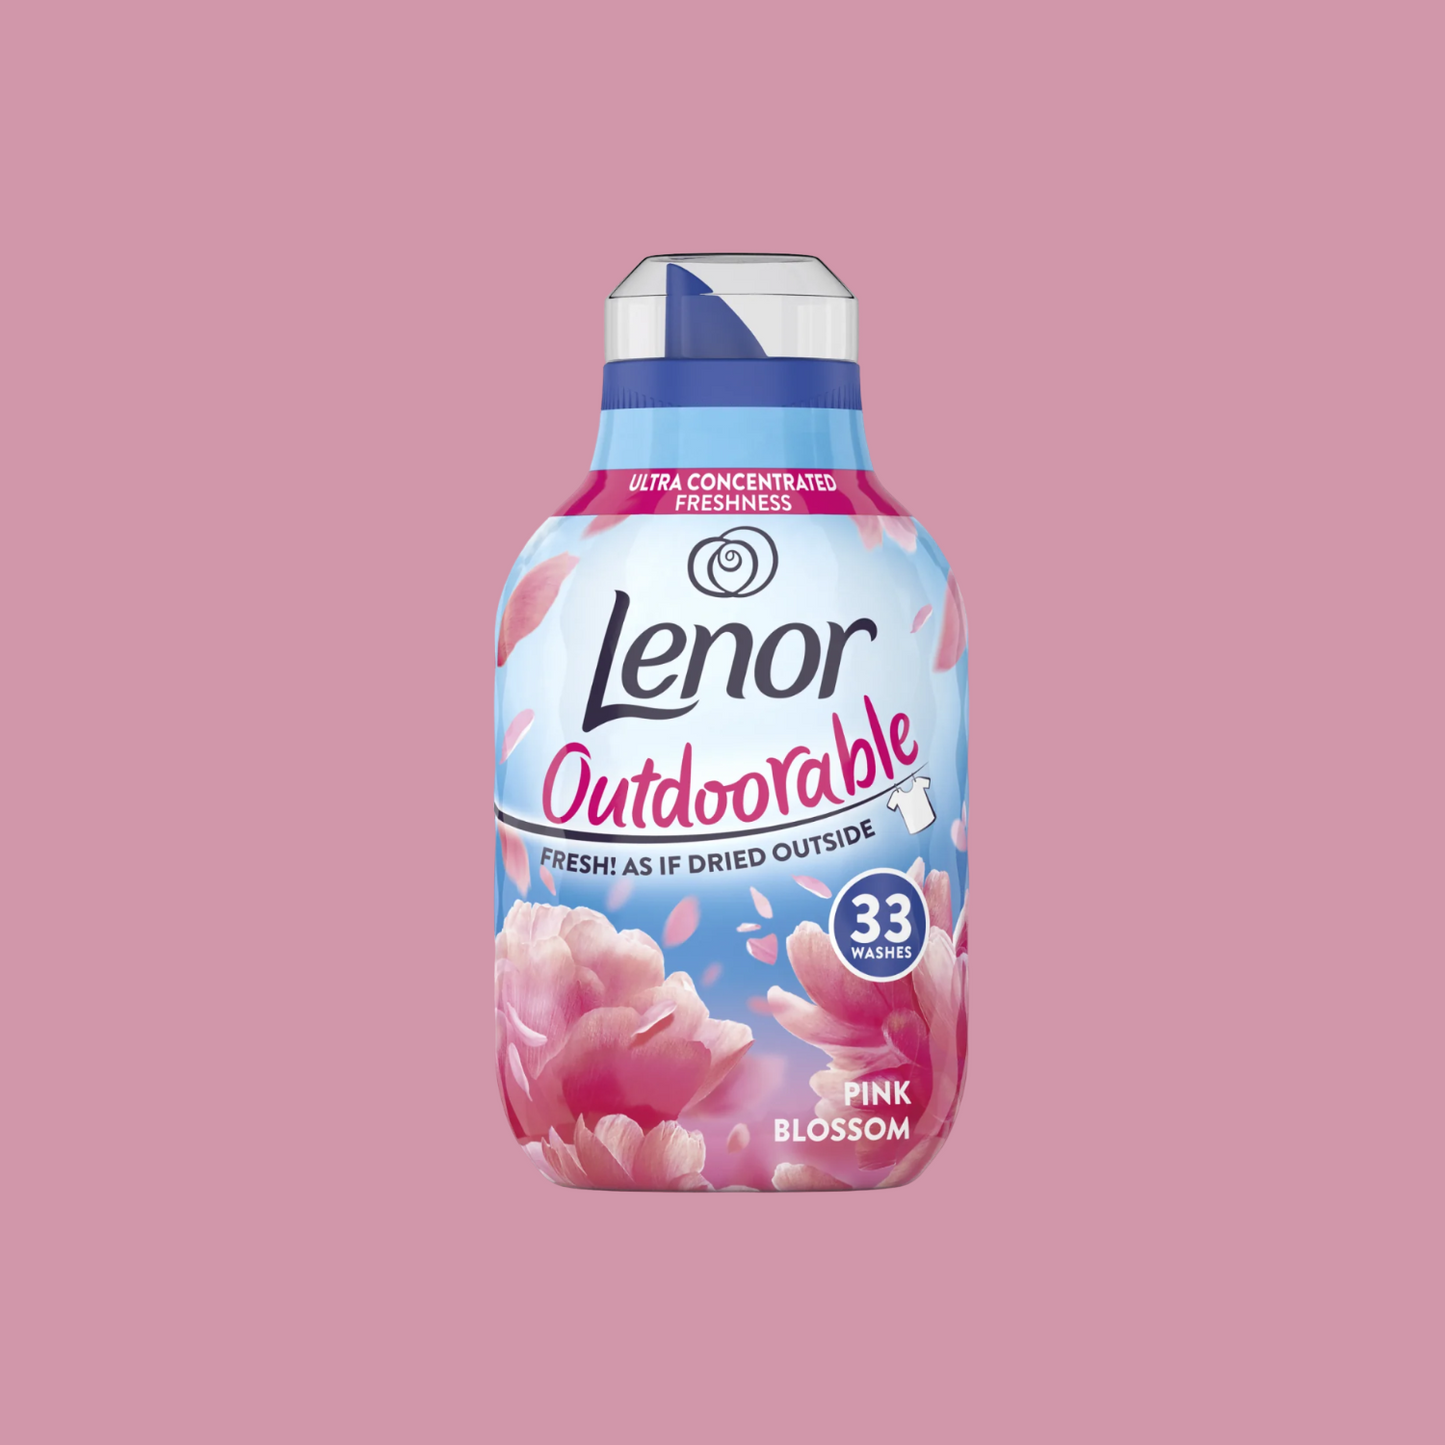 Lenor Outdoorable Pink Blossom 33 wash